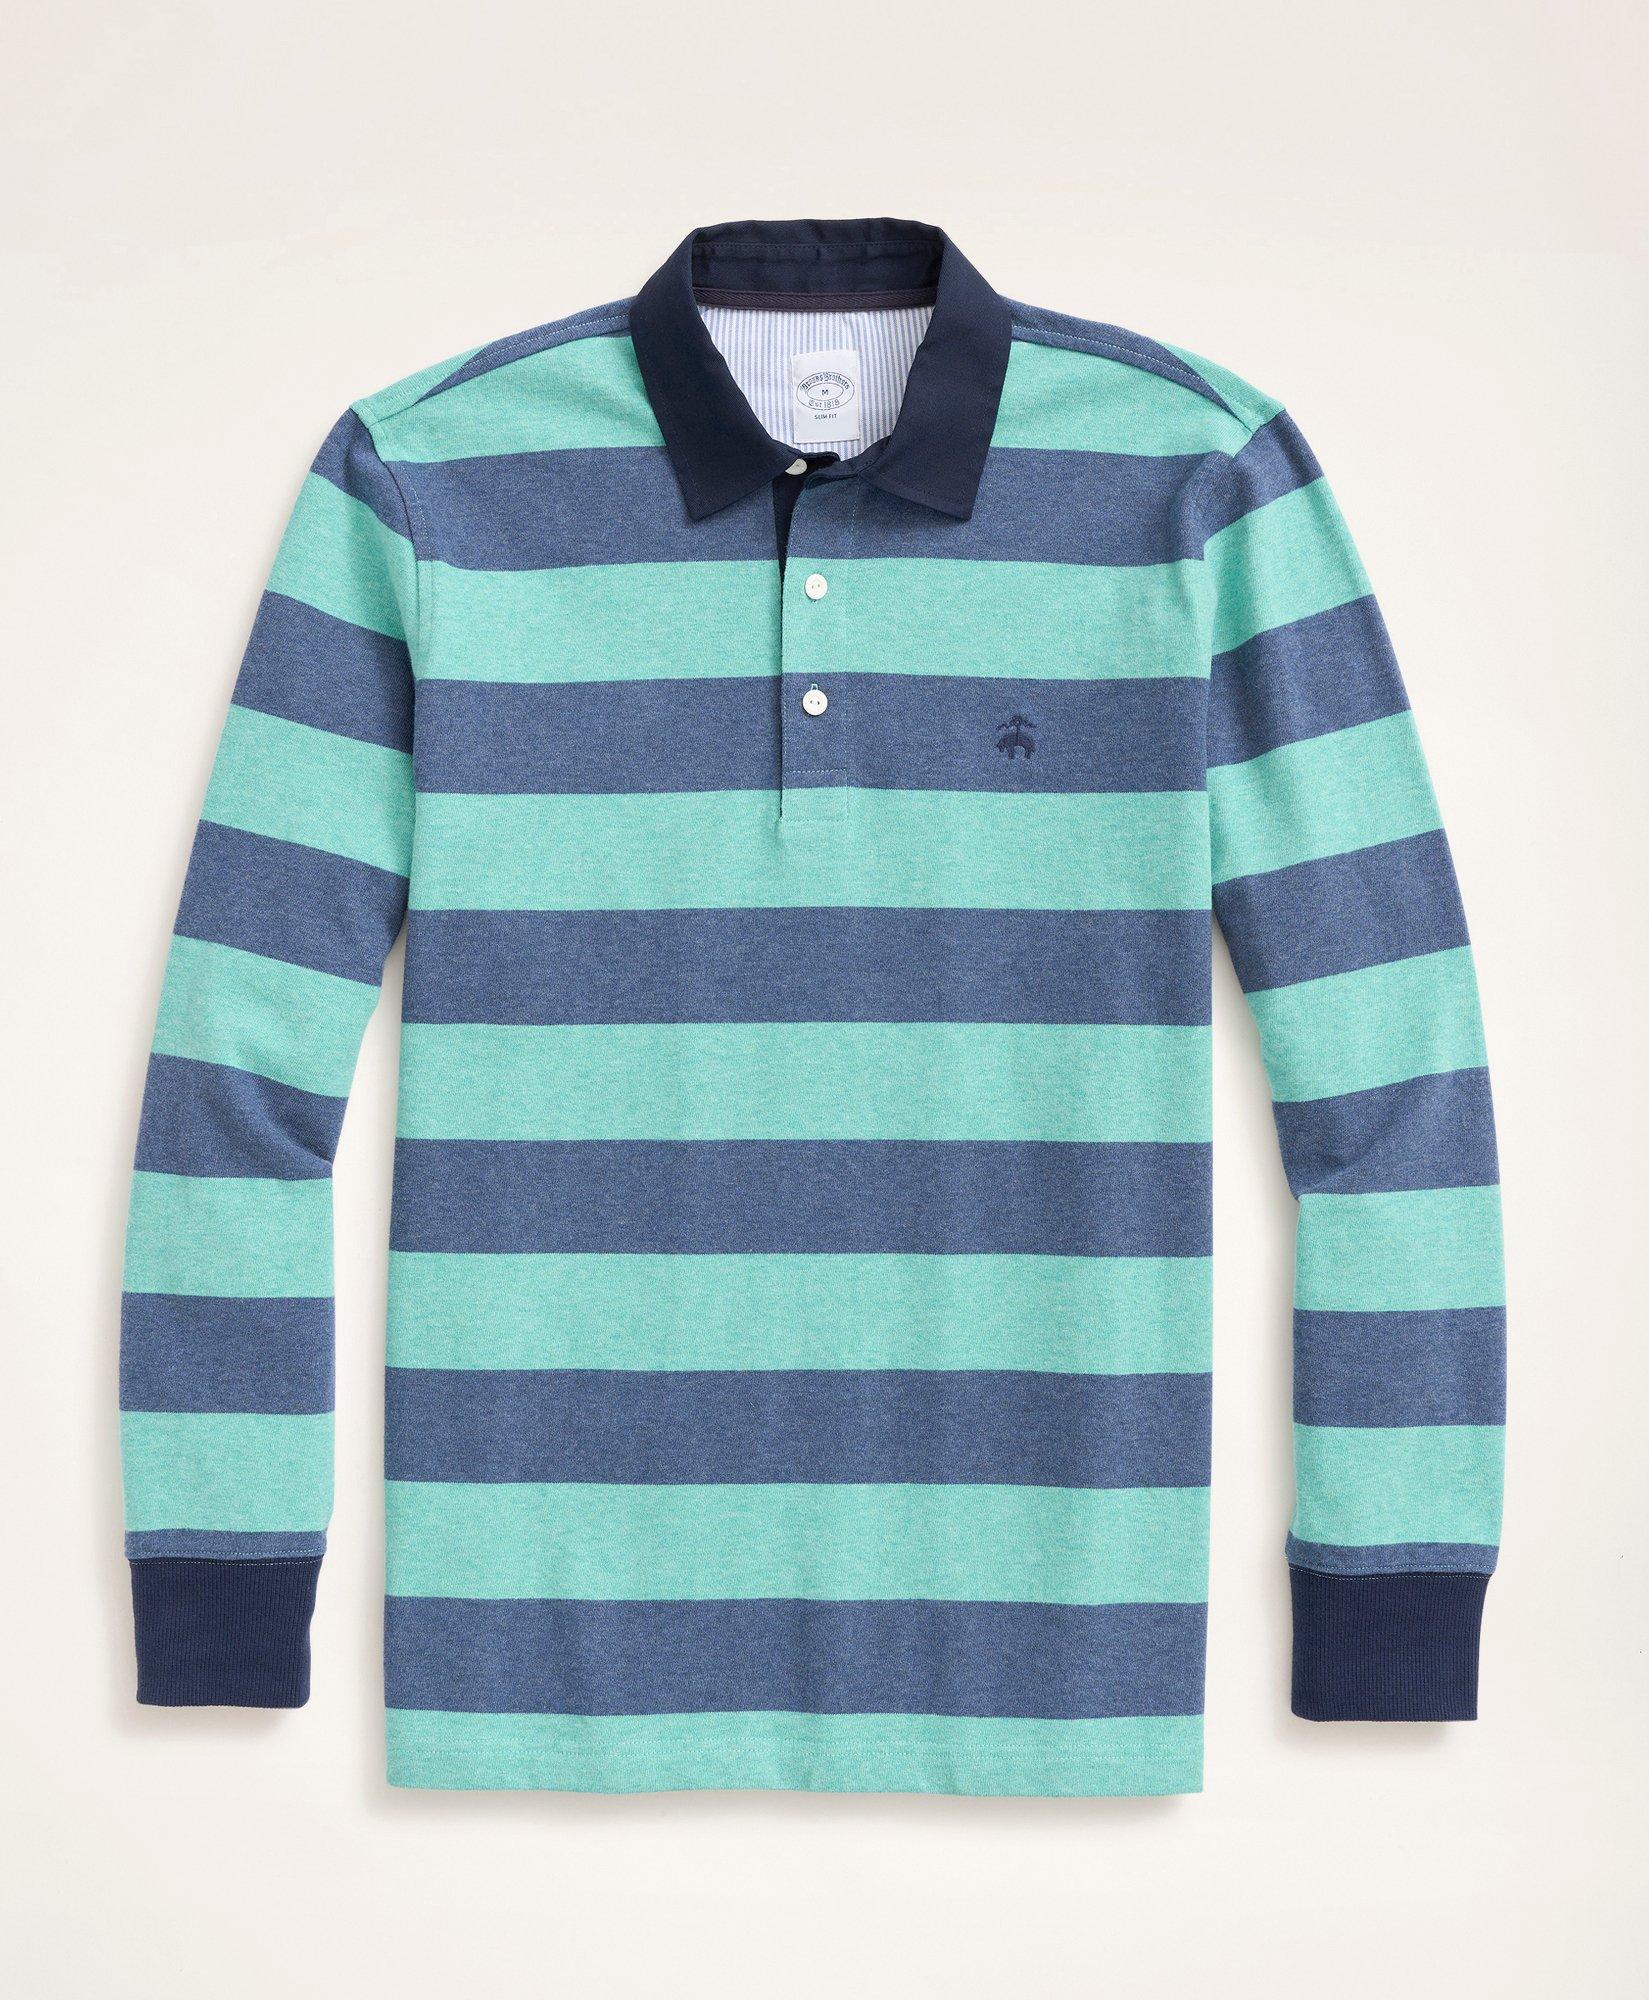 Lightweight Striped Rugby Shirt, image 1